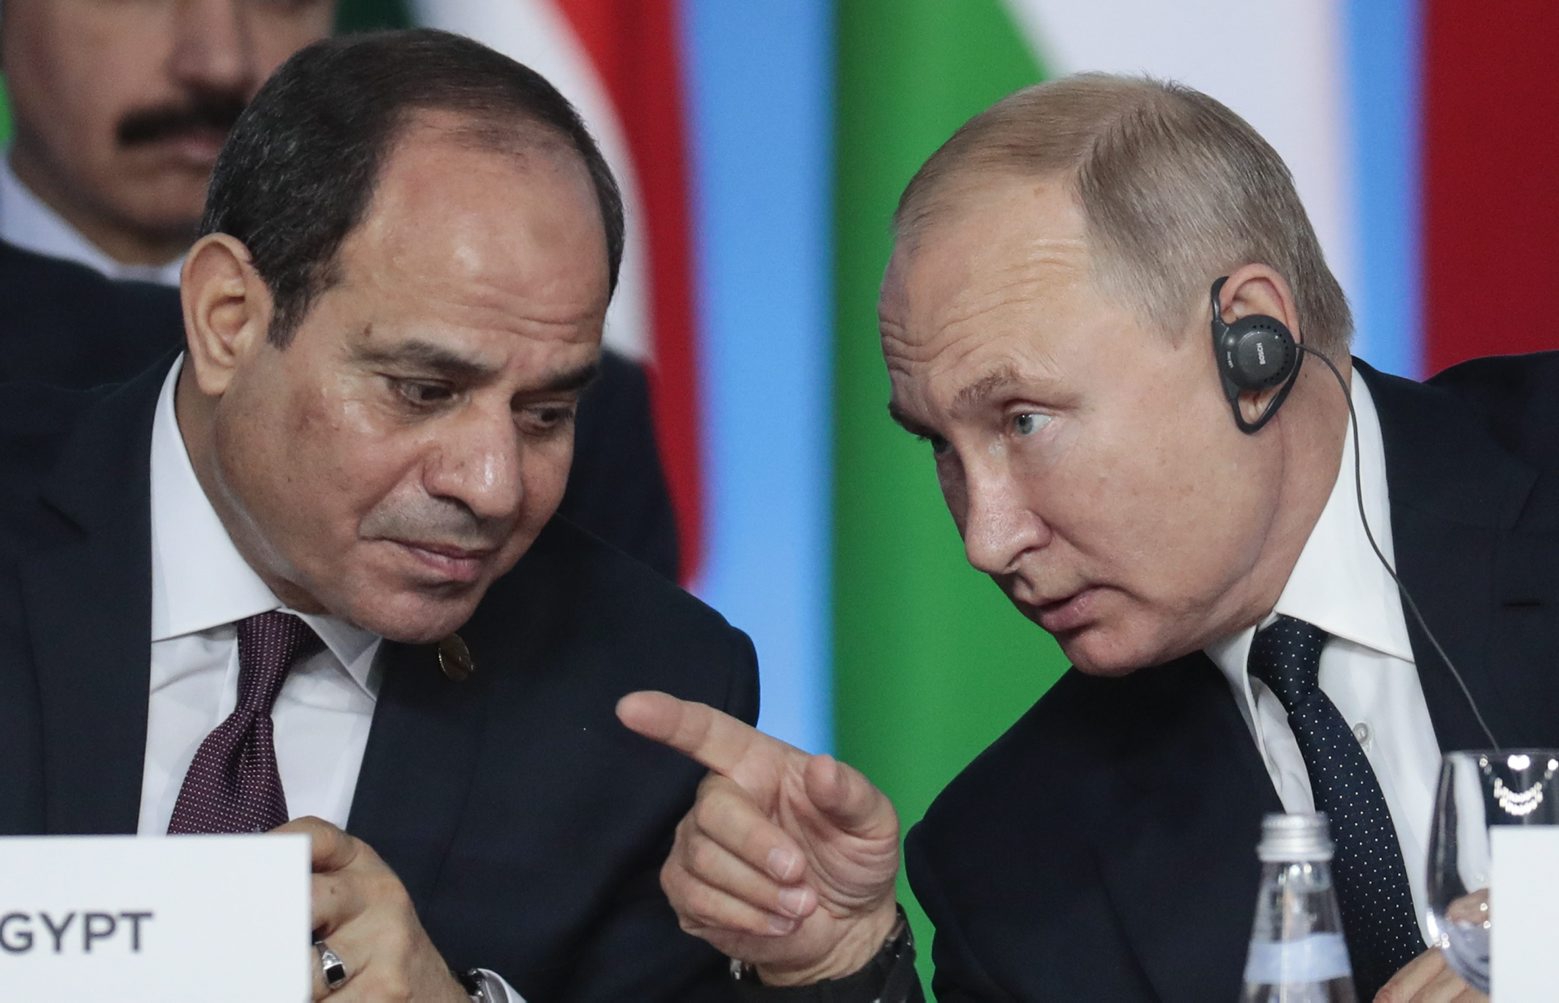 Russian President Vladimir Putin, right, gestures while speaking to Egyptian President Abdel Fattah el-Sisi during a plenary session at the Russia-Africa summit in the Black Sea resort of Sochi, Russia, Thursday, Oct. 24, 2019. (Sergei Chirikov/Pool Photo via AP) Russia Africa